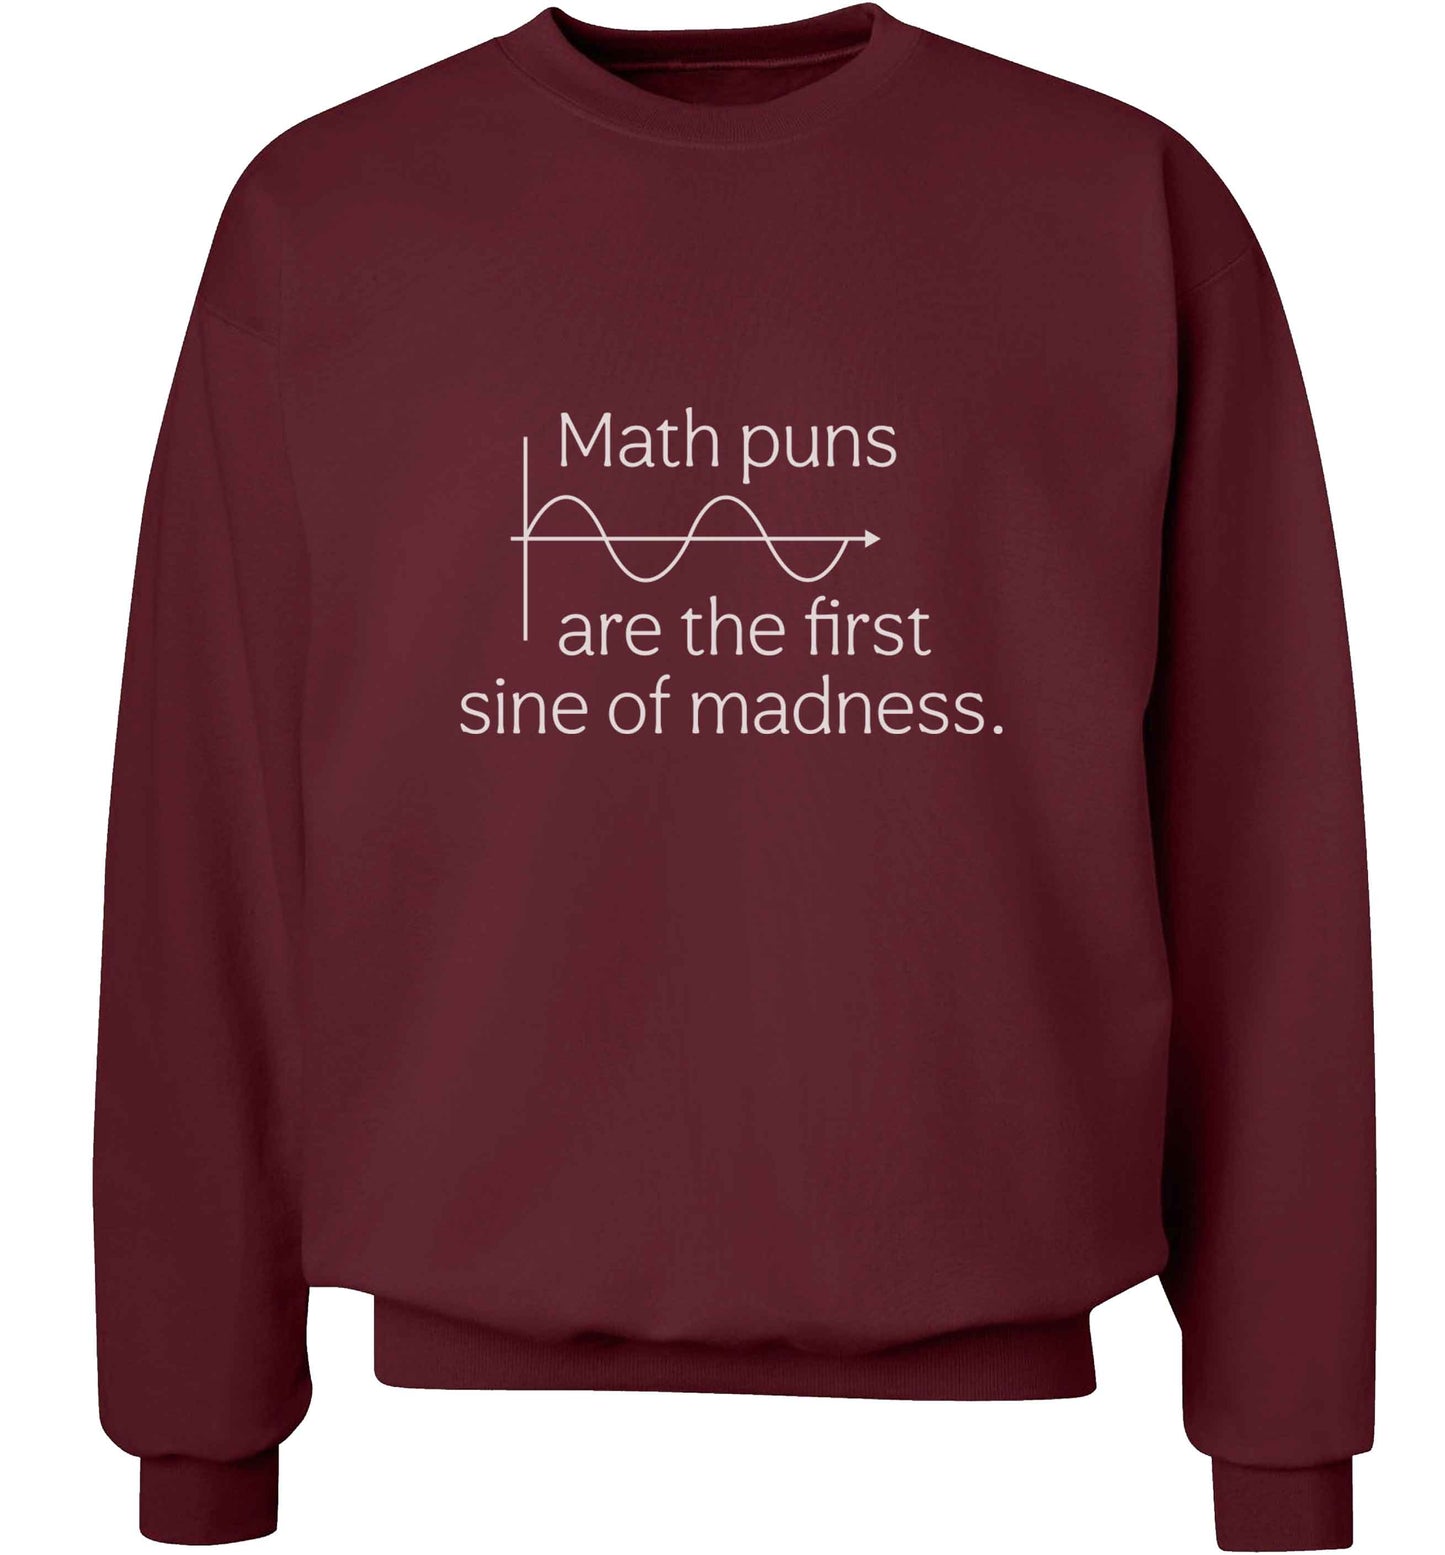 Math puns are the first sine of madness adult's unisex maroon sweater 2XL